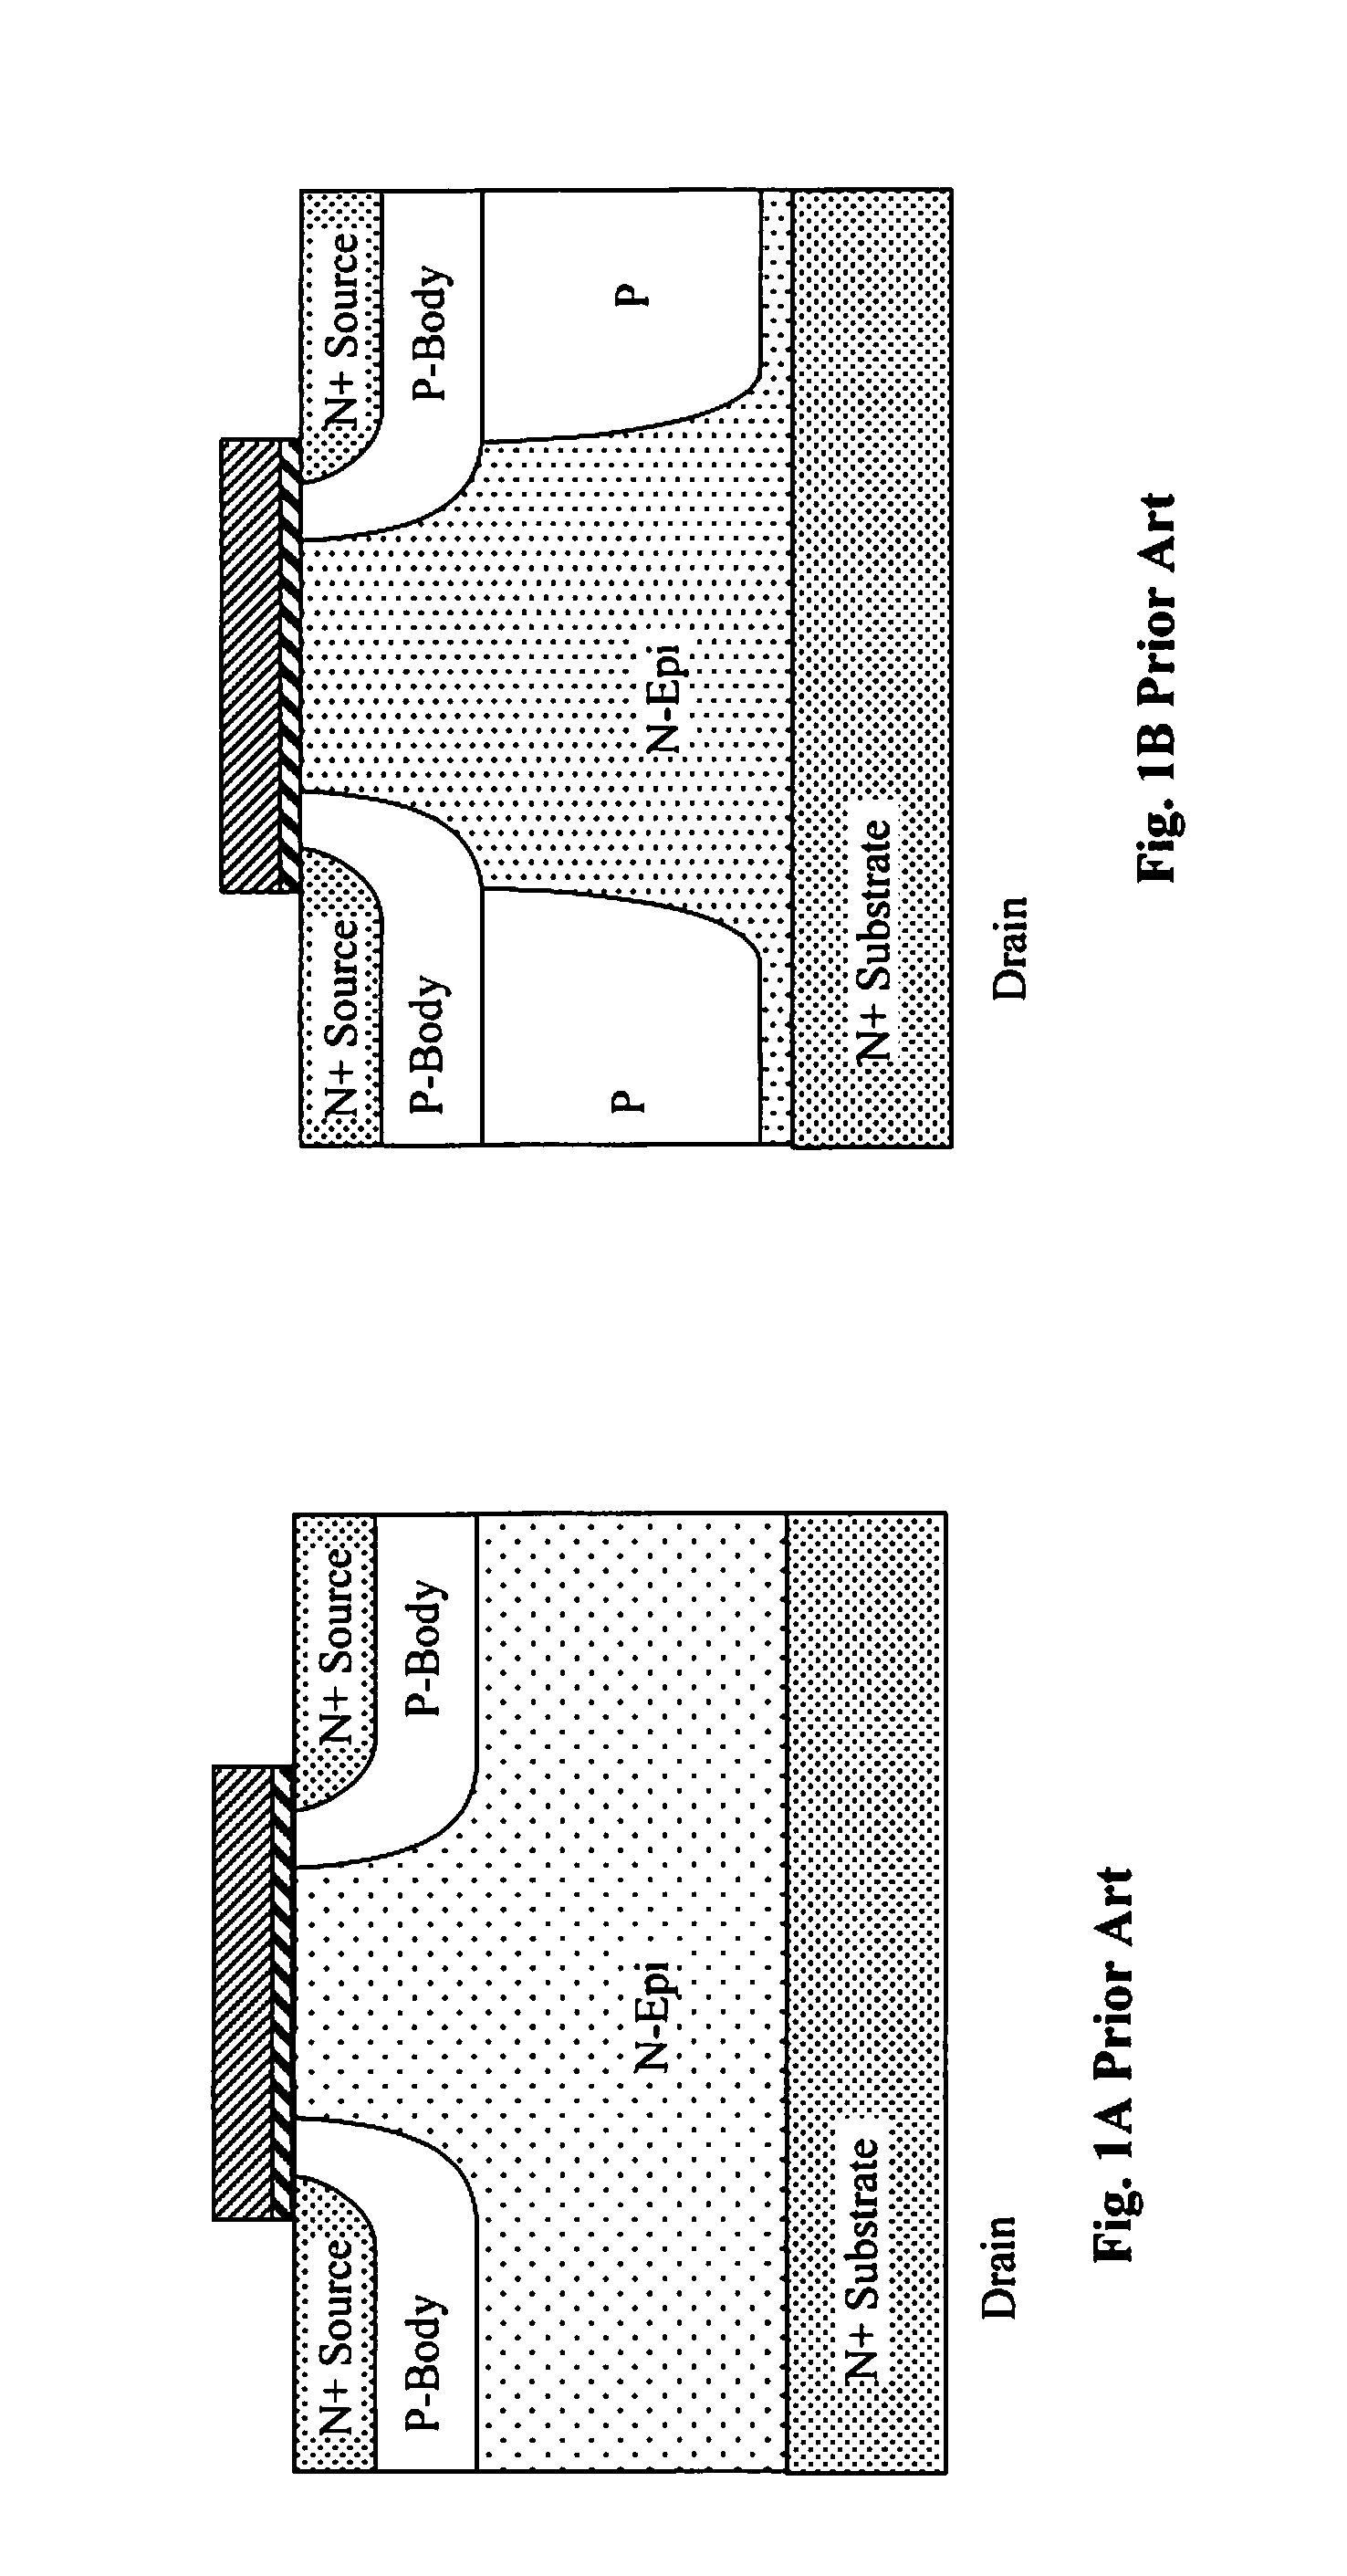 Nano-tube mosfet technology and devices